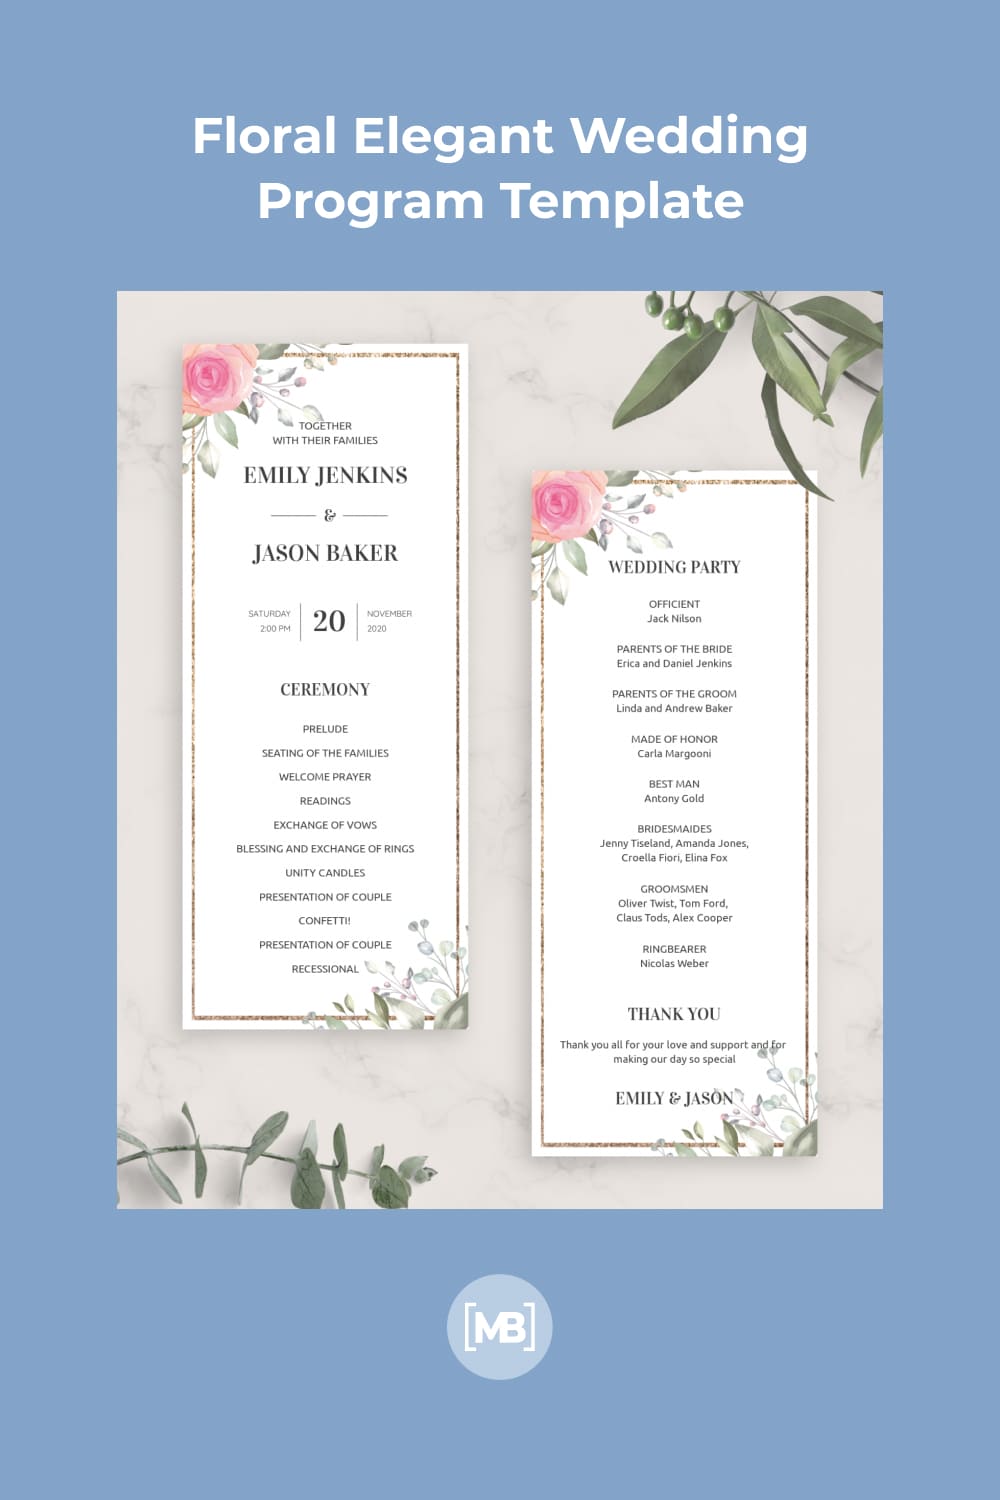 Create a guideline for your guests with the Floral Elegant Wedding Program template.